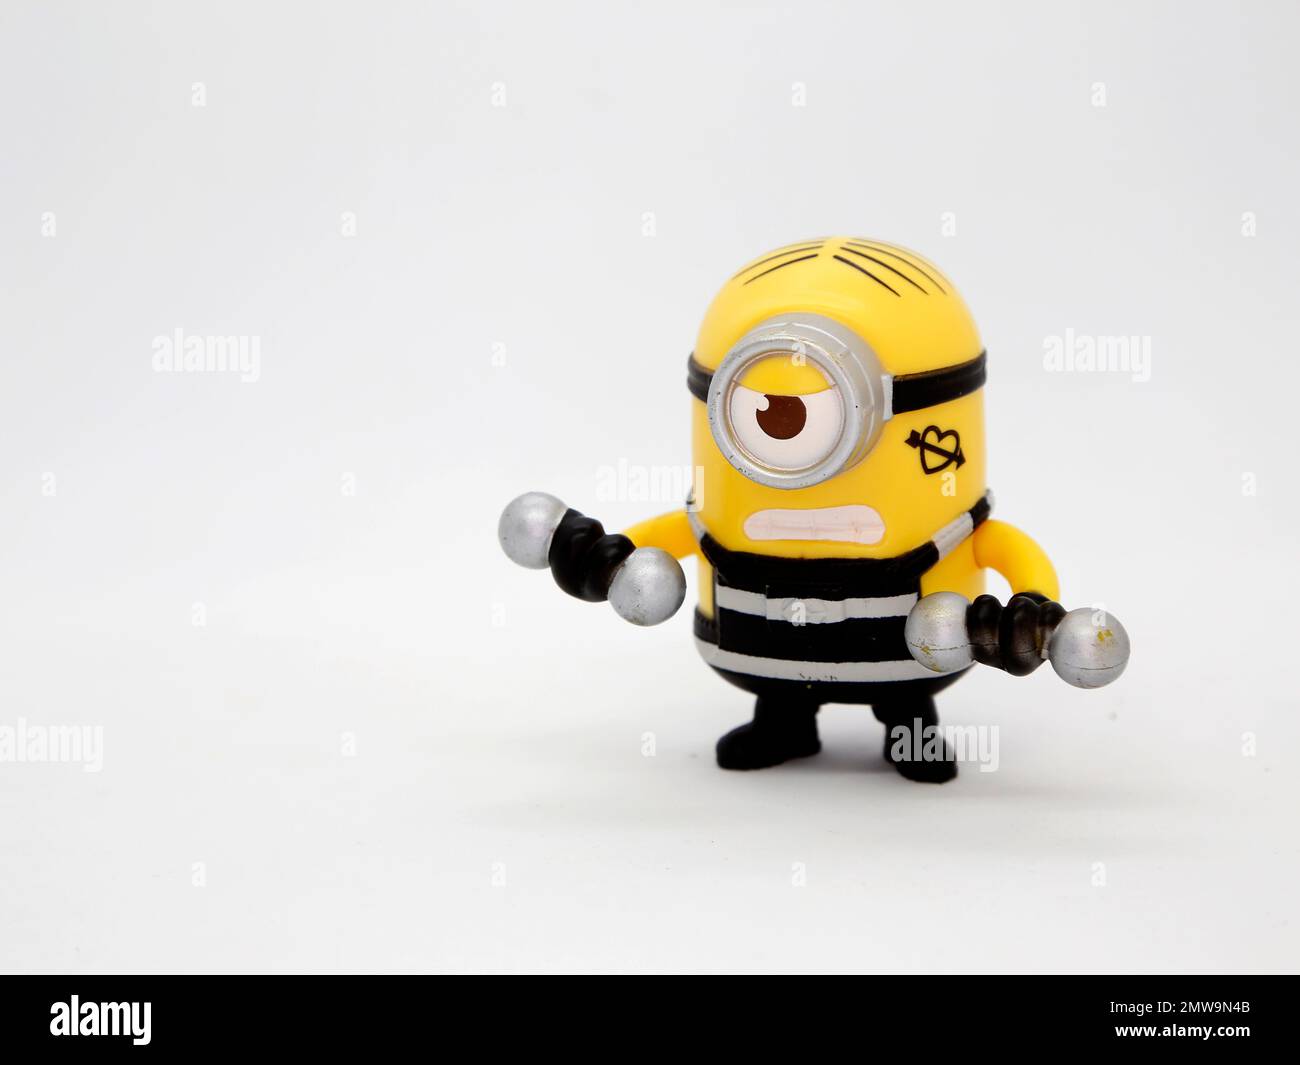 Prisoner minions lifting weights. Weightlifter. Minions prisoner dressed in striped suit and tattoos. Characters from the famous Despicable Me movies. Stock Photo